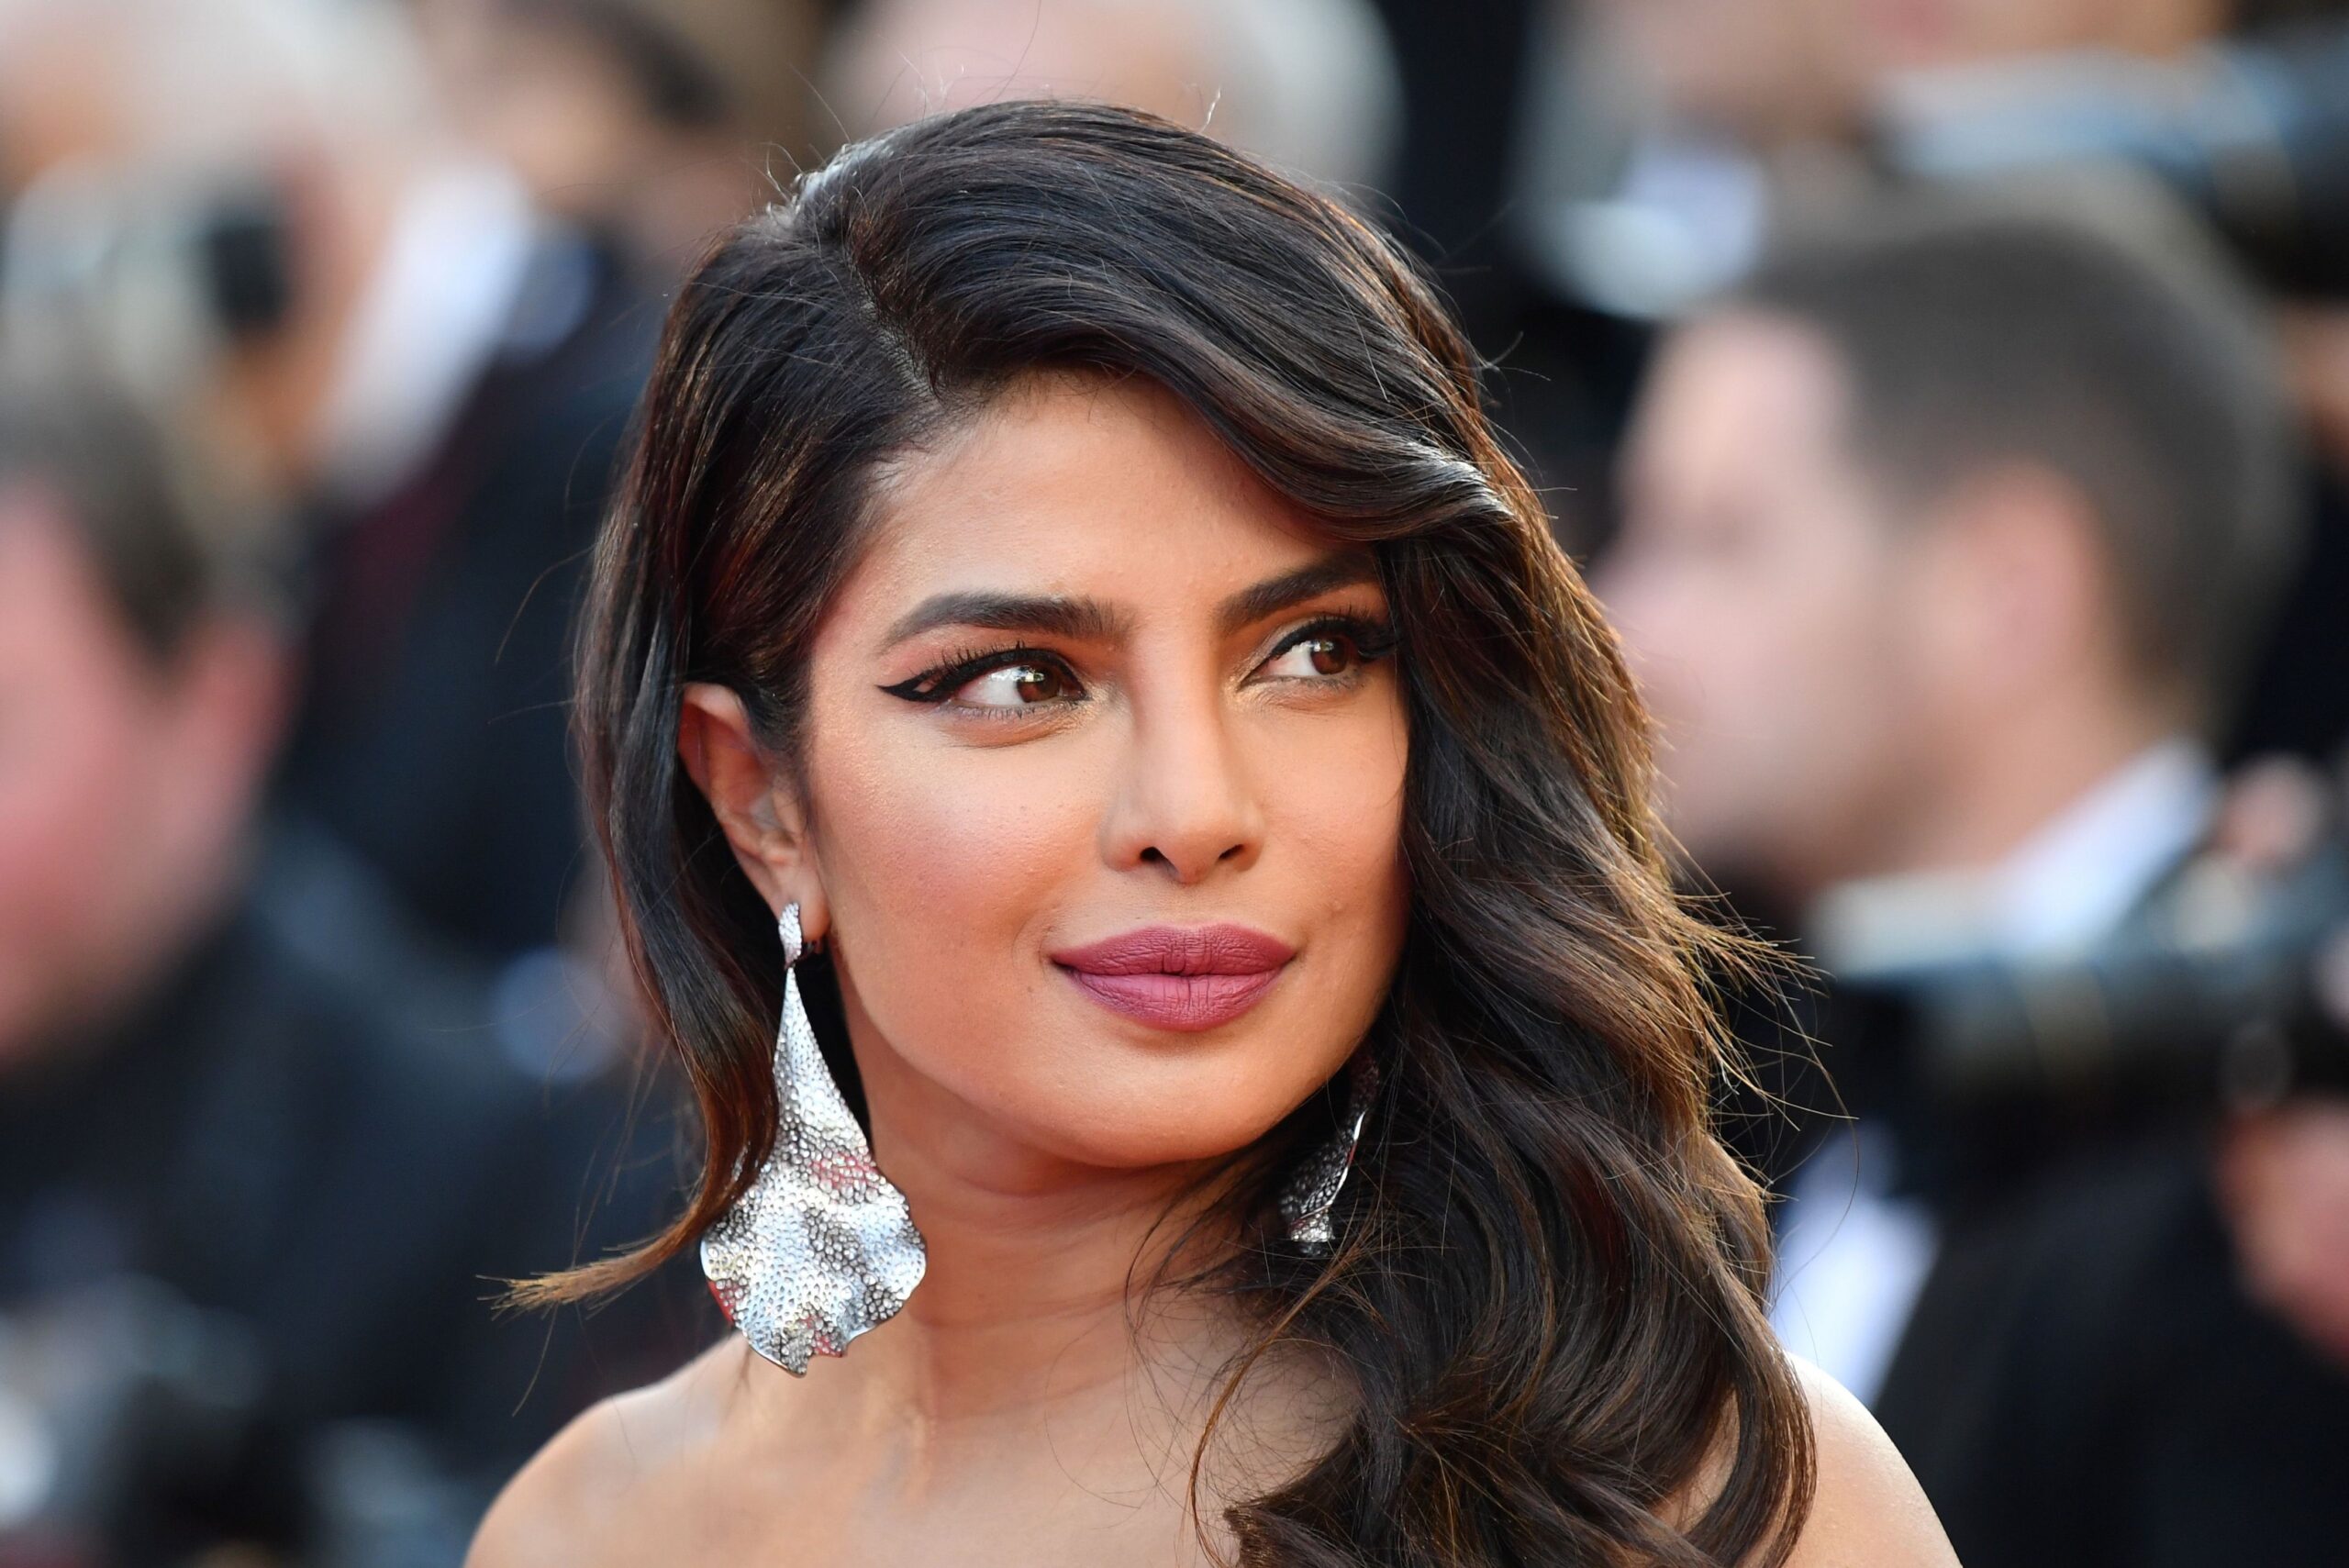 Priyanka Chopra Discusses Leaving Bollywood For Hollywood: ‘Tired Of The Politics’